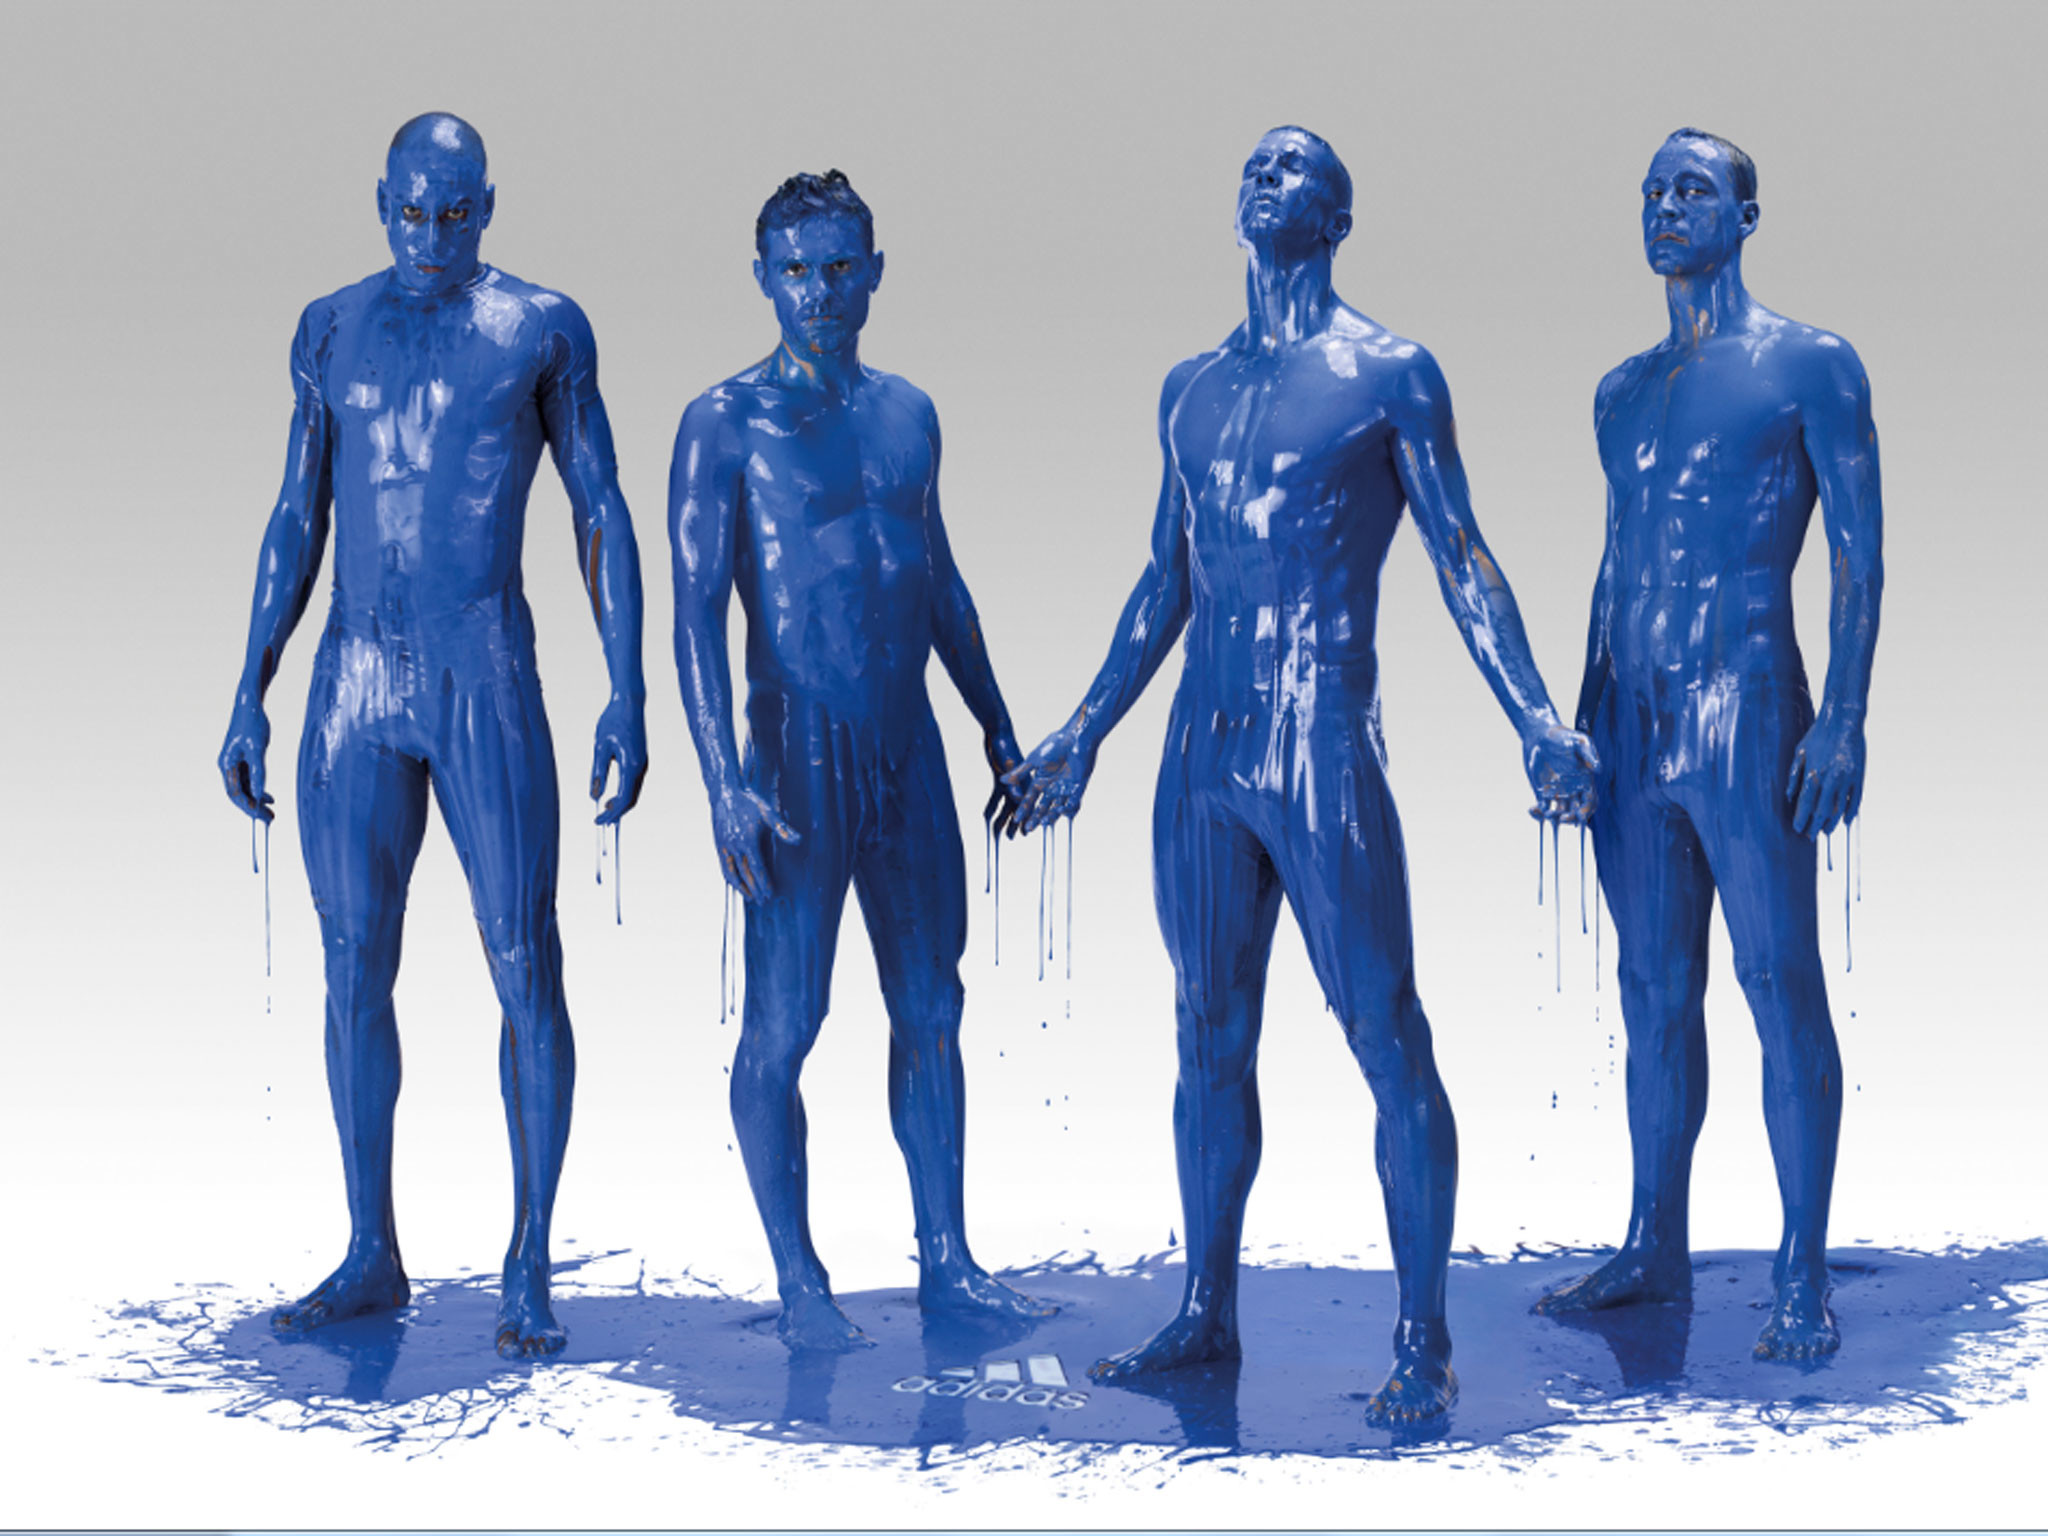 2048x1536 In pictures: Chelsea players John Terry, Fernando Torres and David Luiz  star in bizarre marketing campaign for adidas covered in blue paint | The  ...